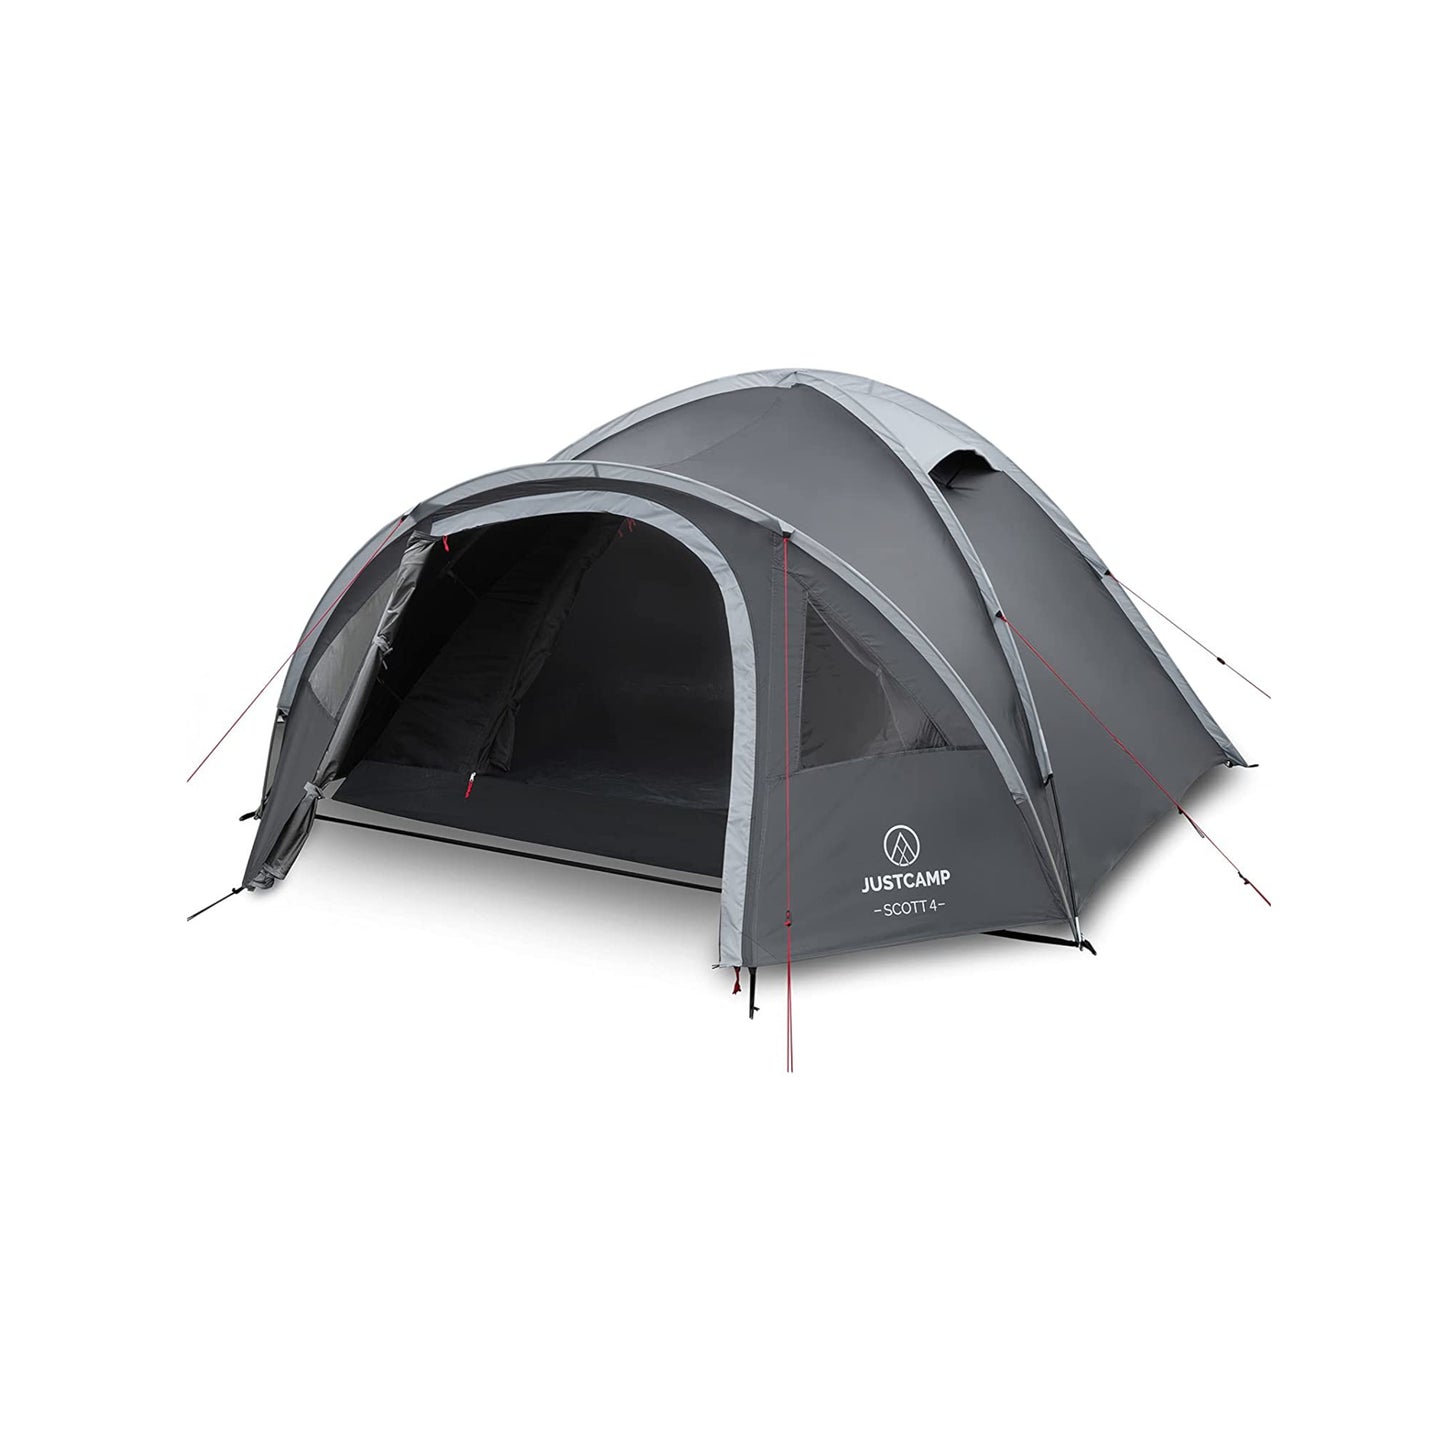 Camping family tent